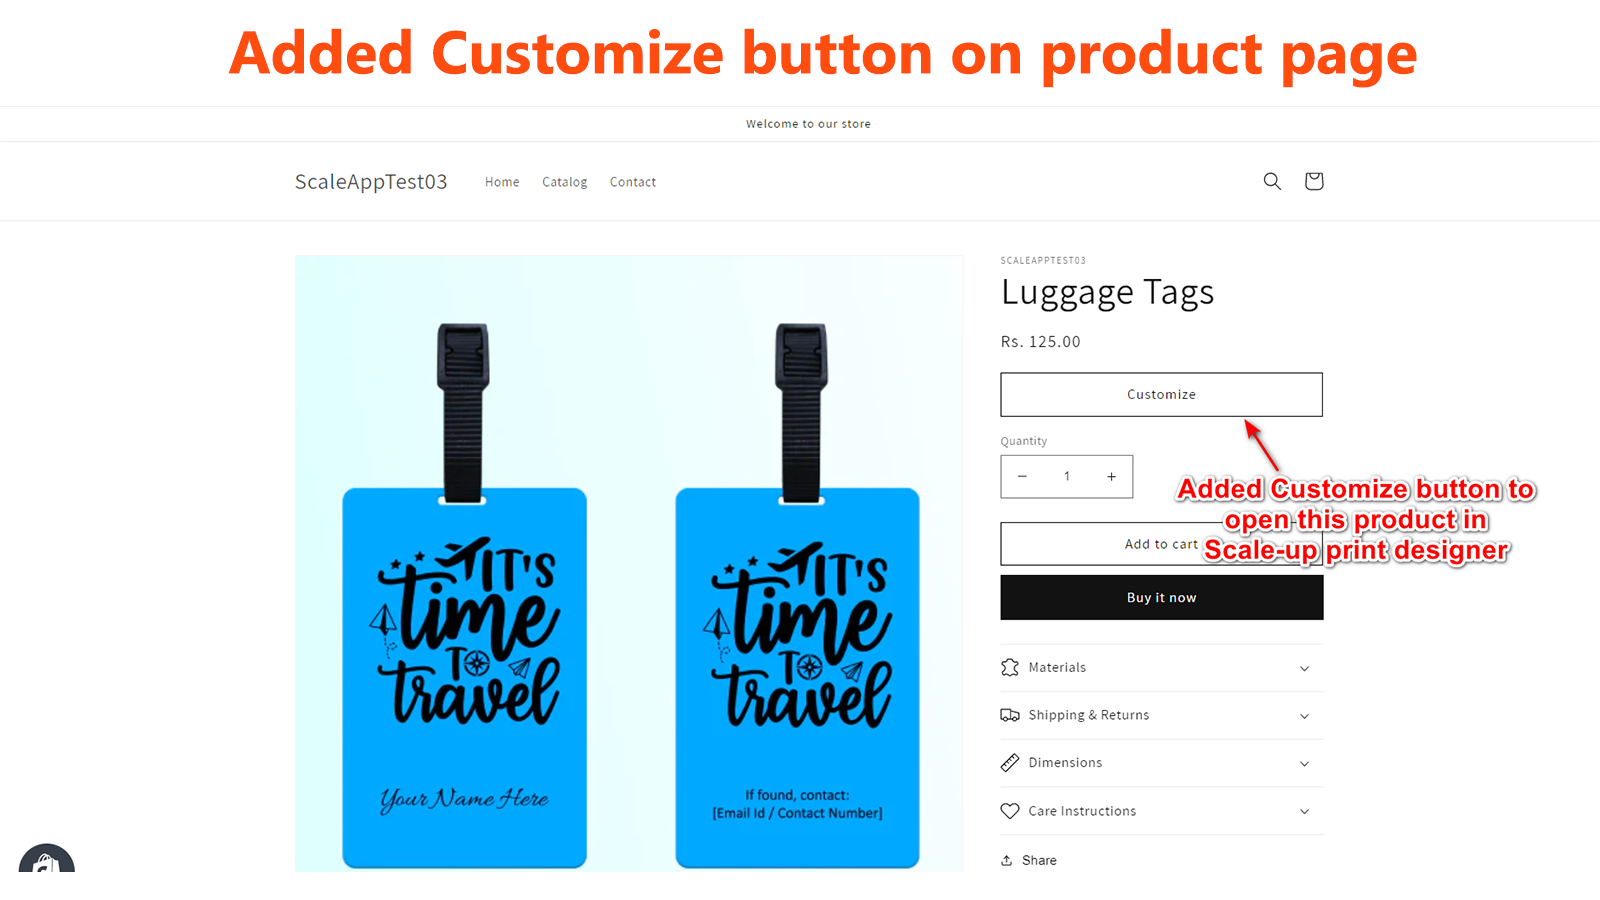 Scale-up print designer - Customize button added in product page